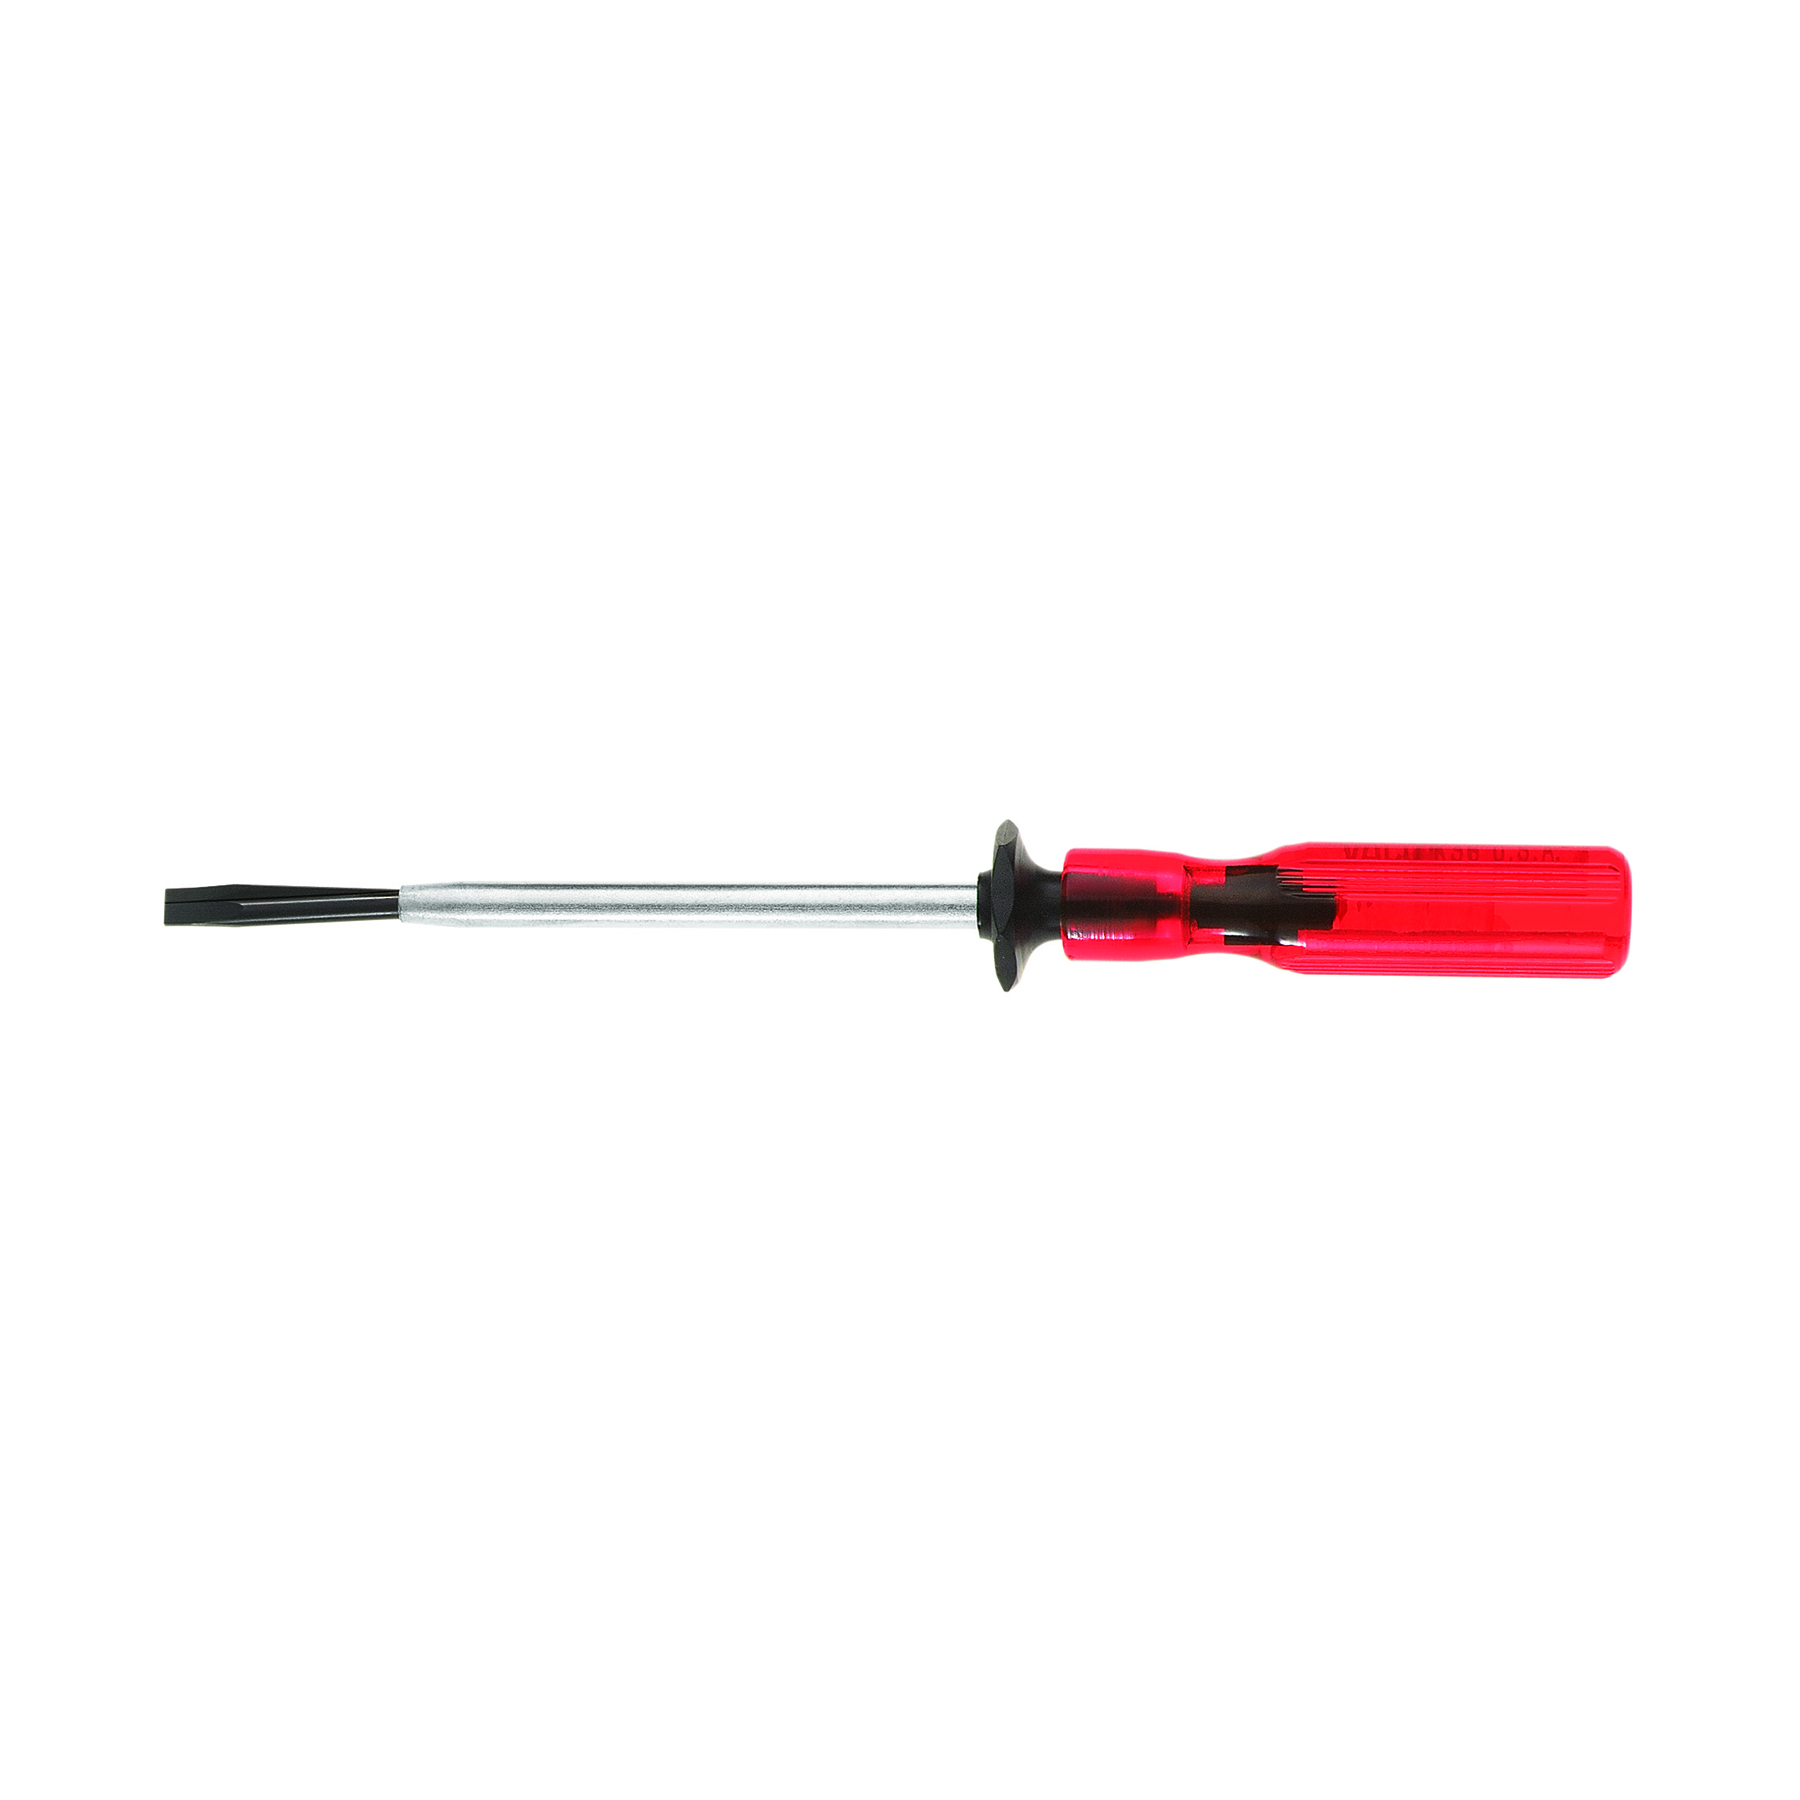 8MM SLOTTED SCREW-HOLDING SCREWDRIVER